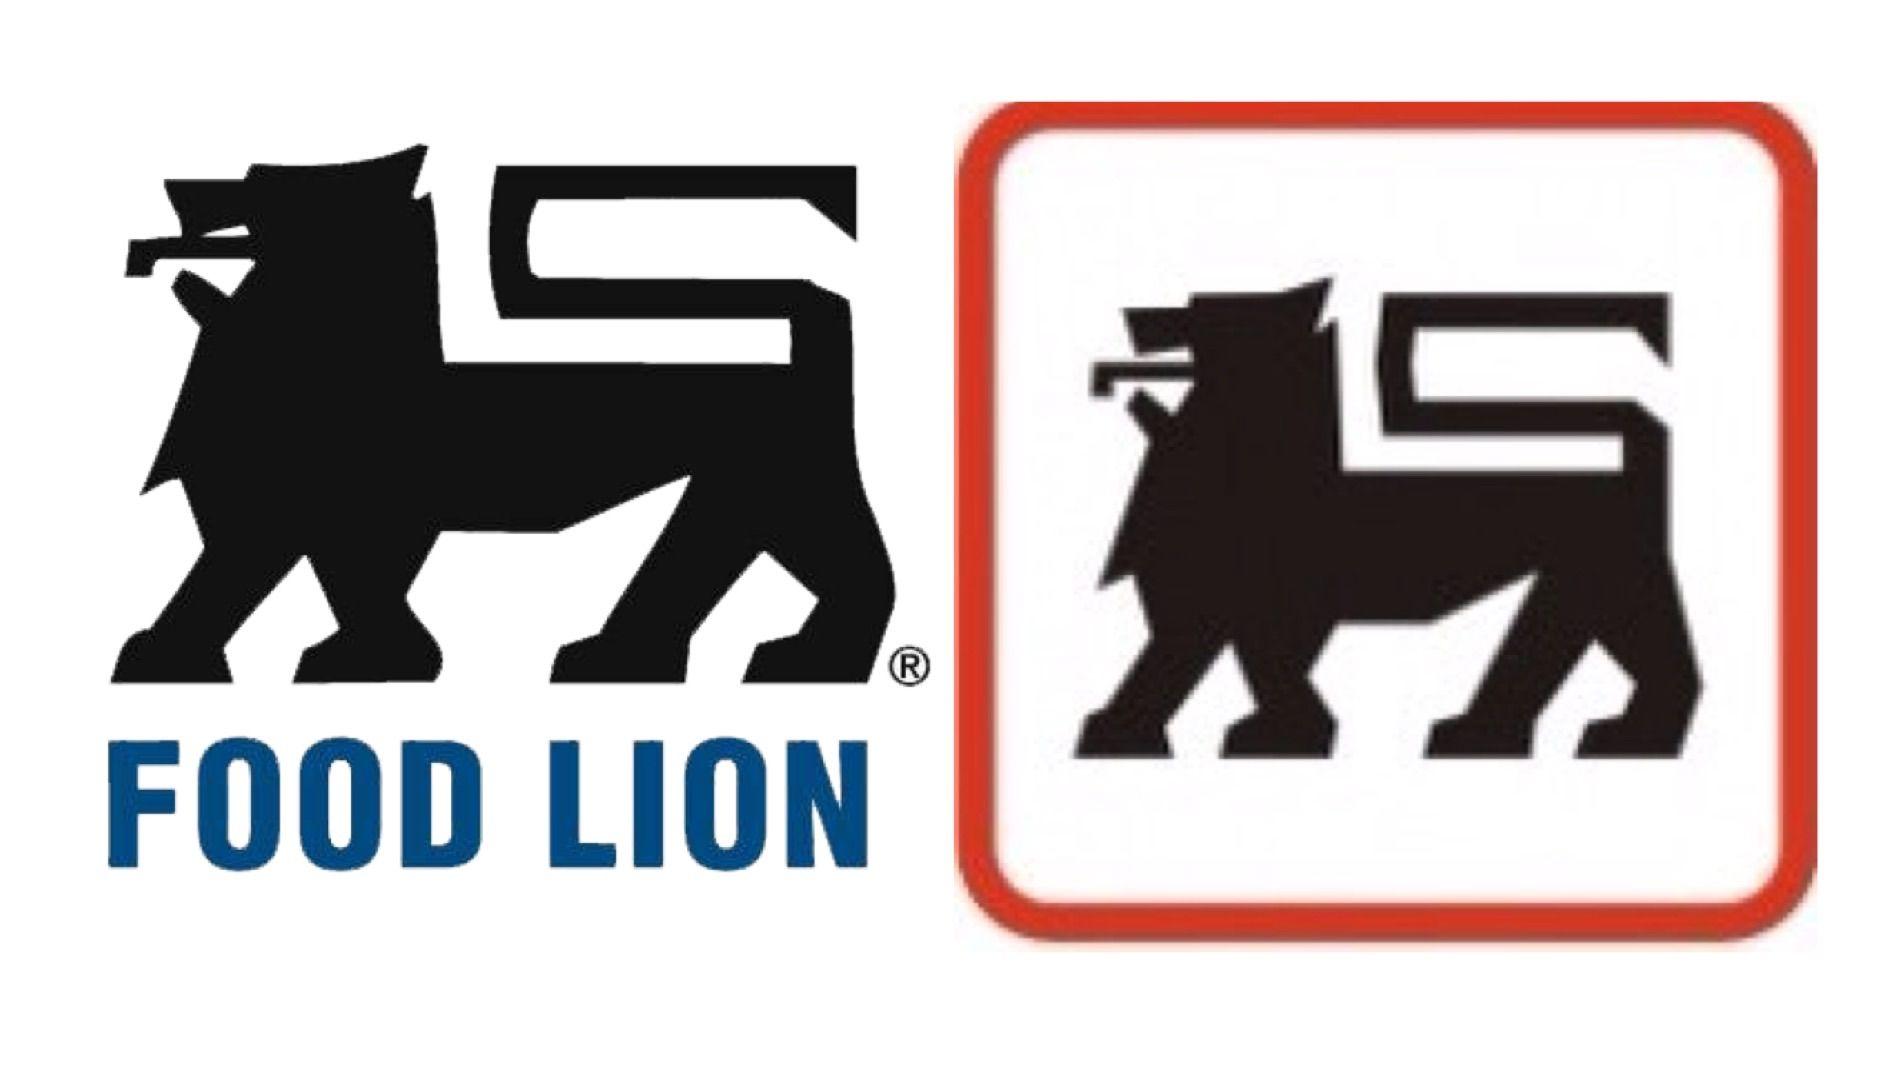 Food Lion Logo - plagiarism - Is this plagiarizing of the Food Lion logo? - Graphic ...